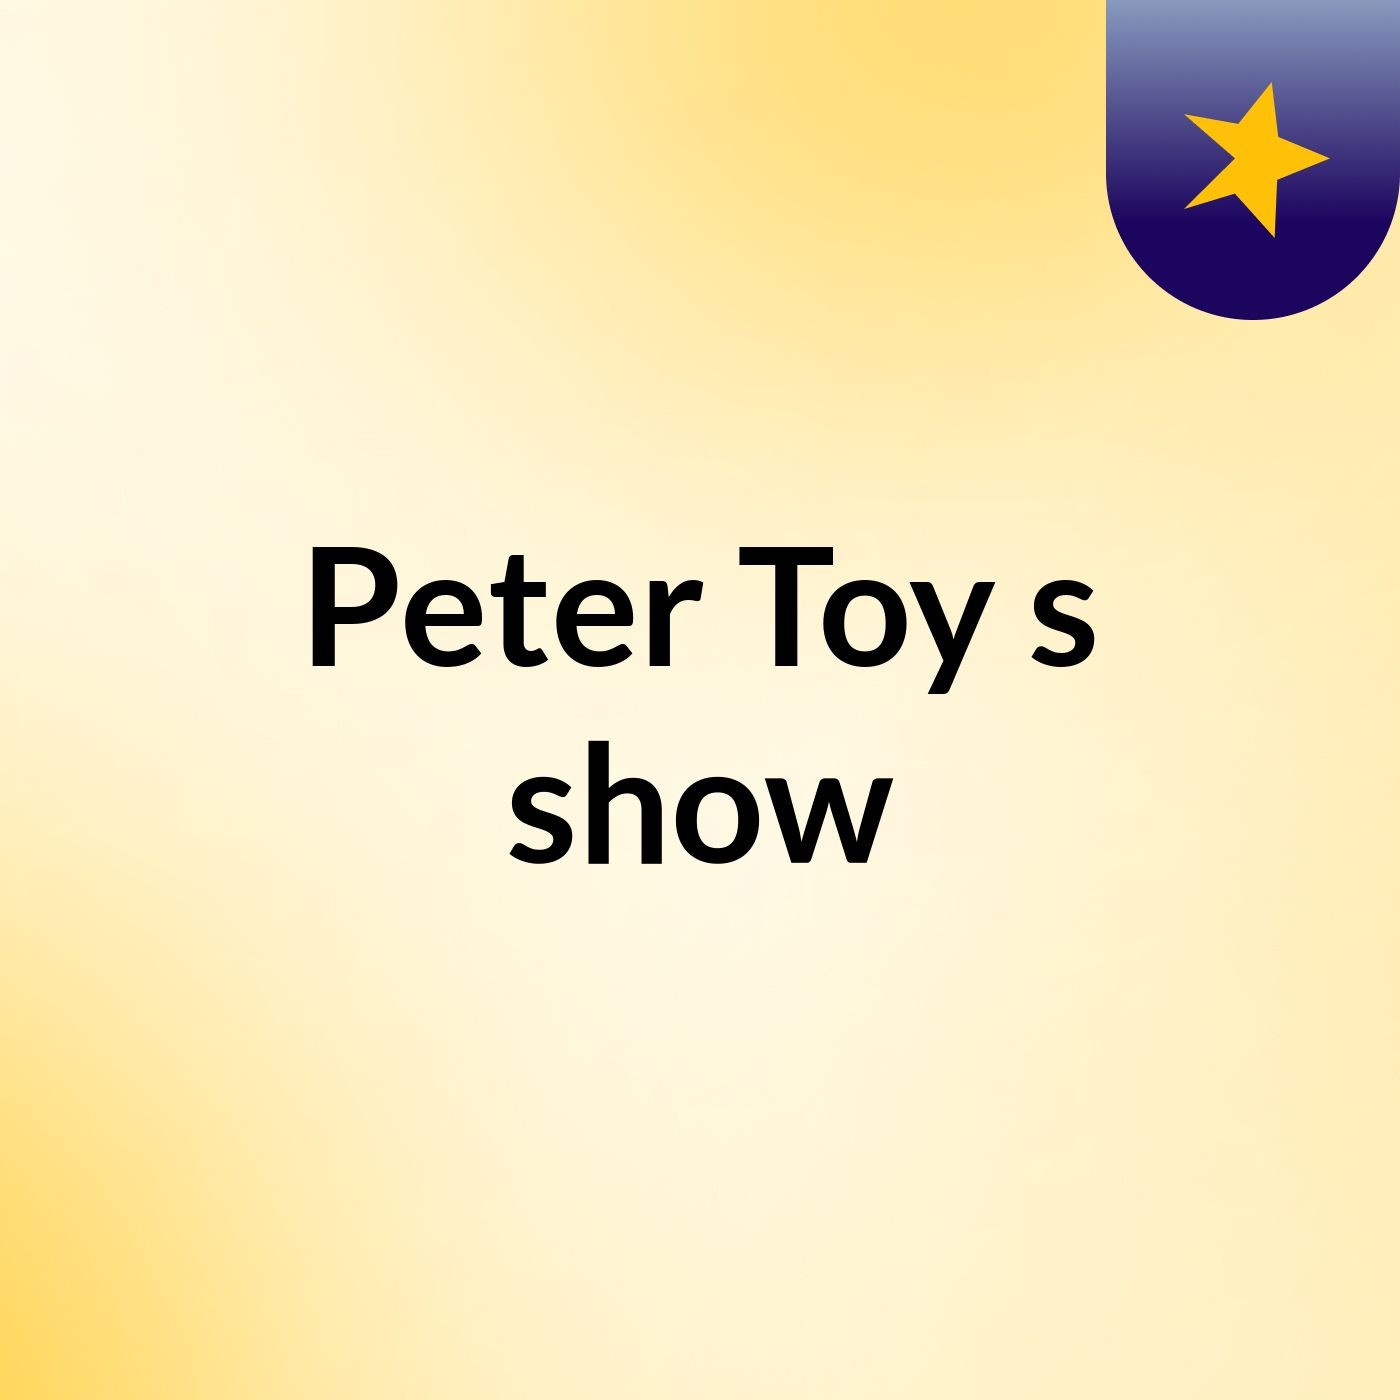 Peter Toy's show